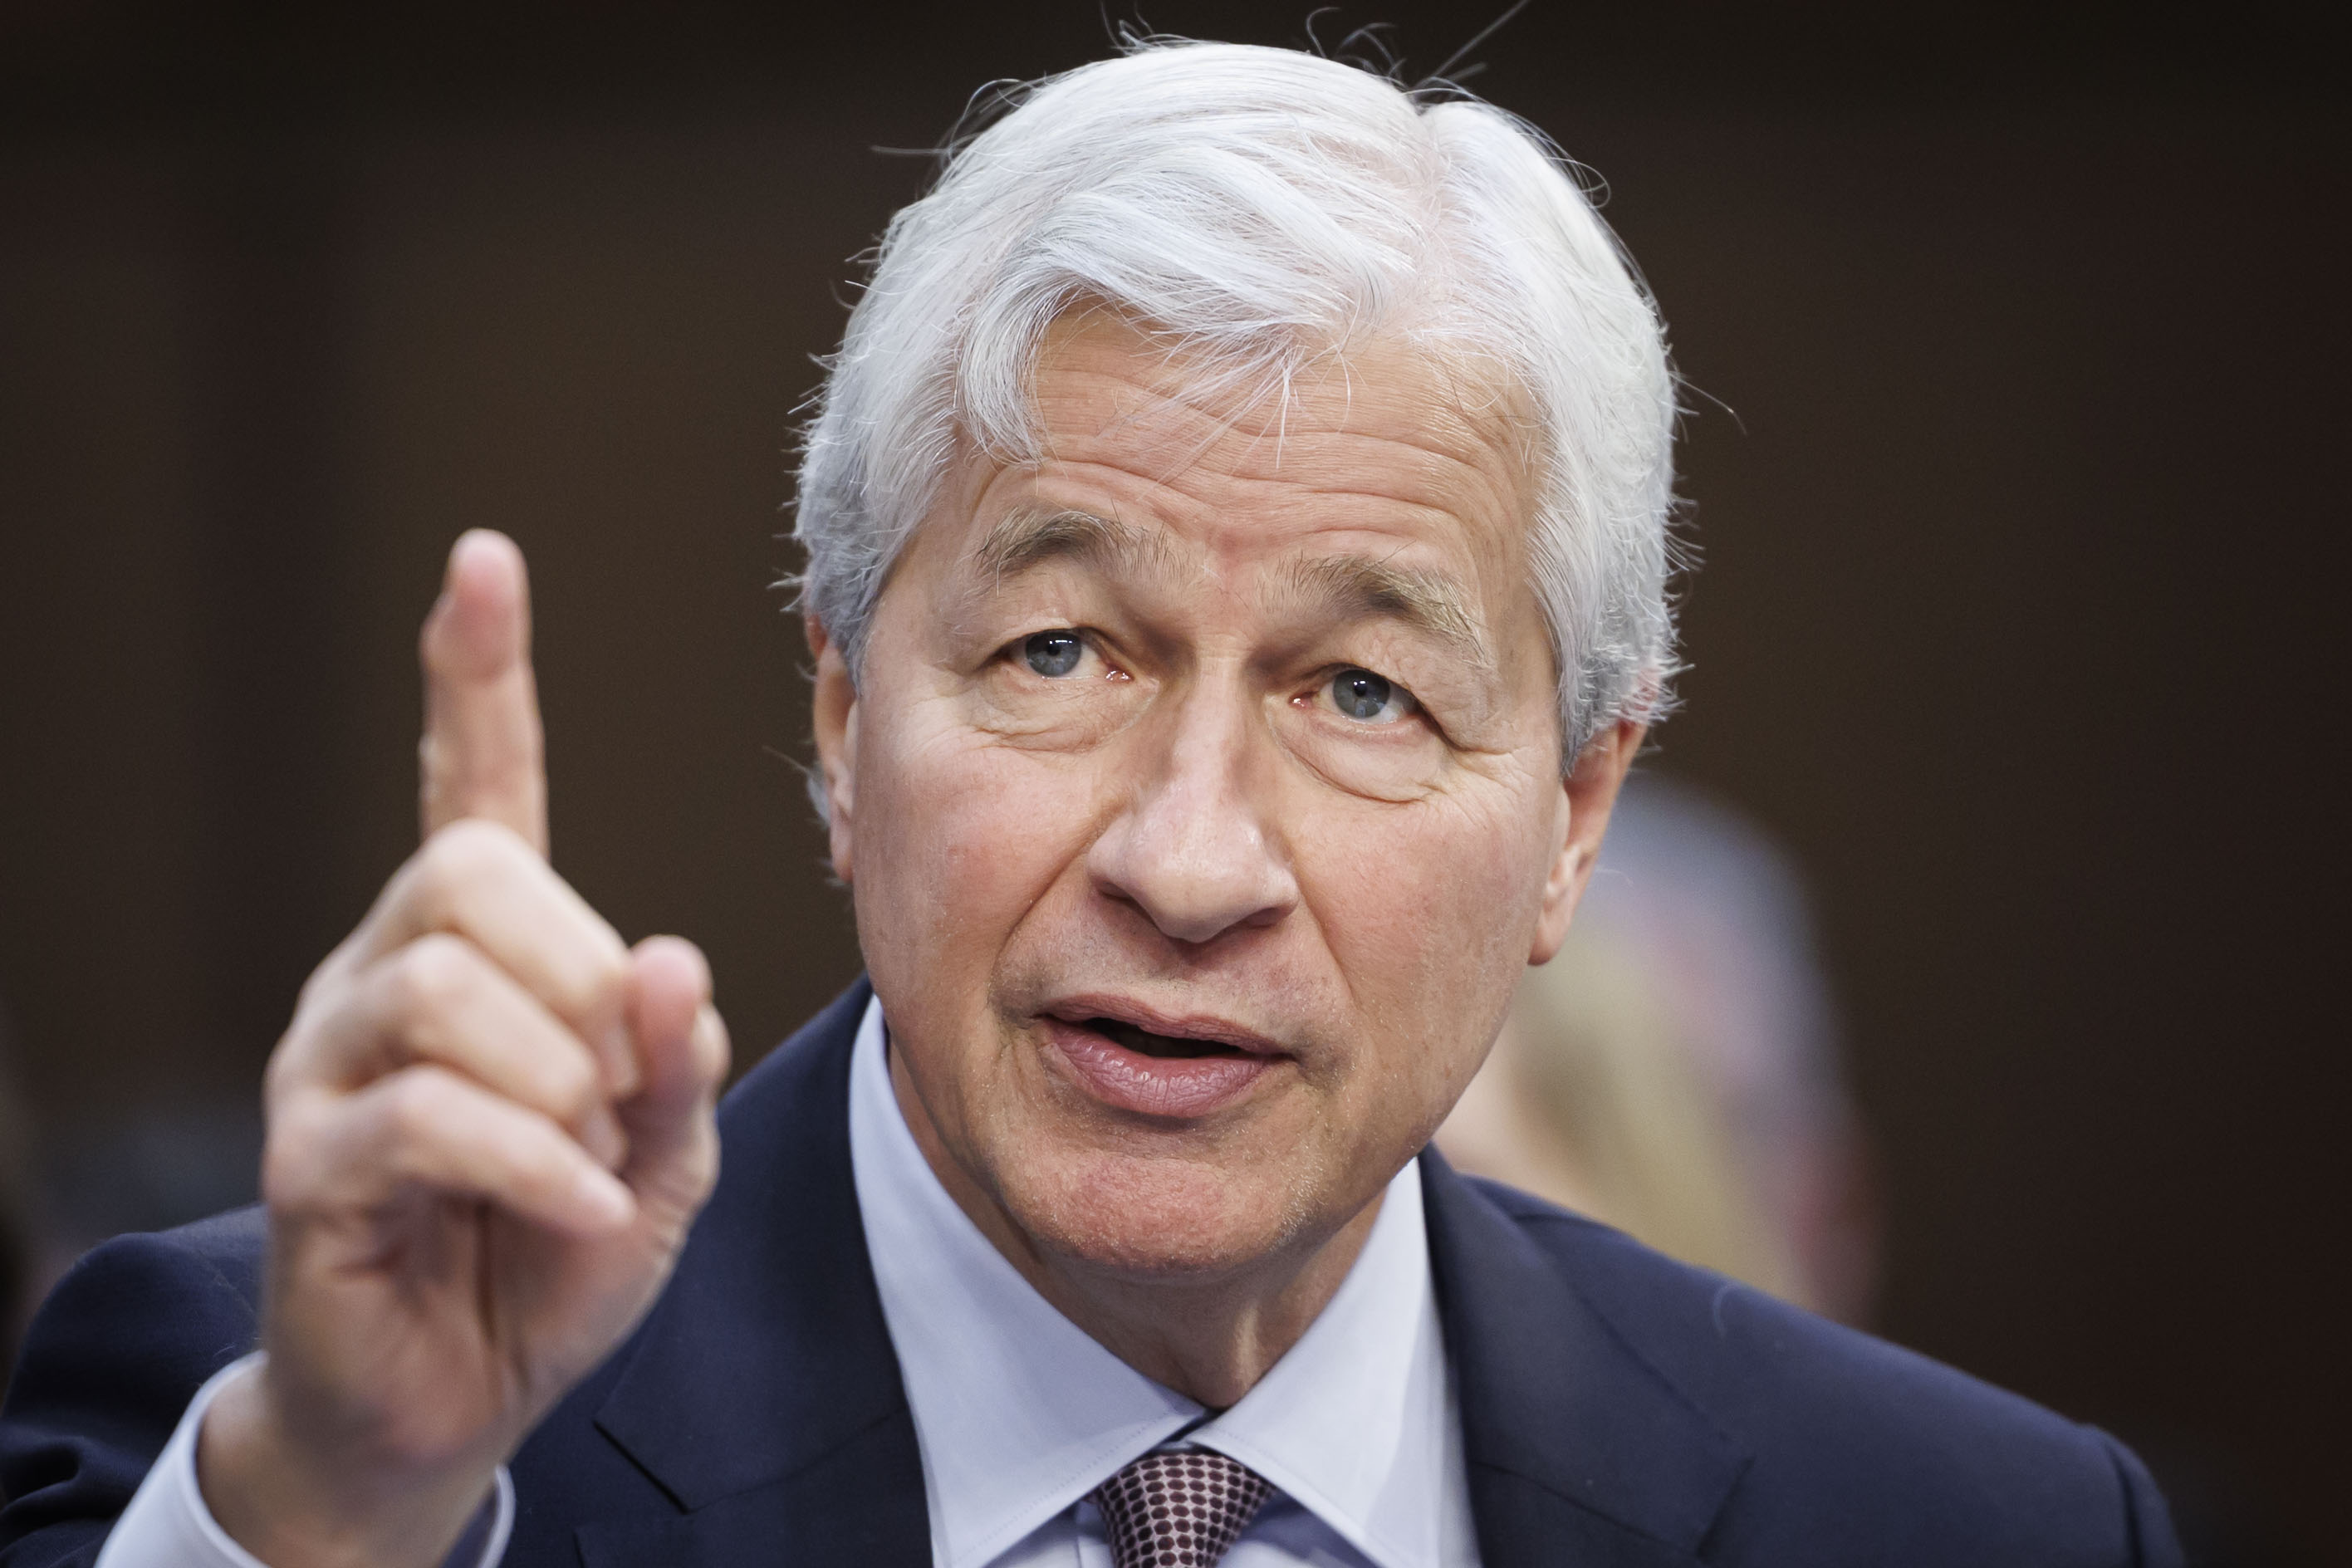 Jamie Dimon, chairman and chief executive officer of JPMorgan Chase & Co., speaks during a Senate Banking, Housing, and Urban Affairs Committee hearing in Washington, D.C., US, on Wednesday, Dec. 6, 2023. The heads of the biggest US banks will use the hearing to make their case for watering down rule proposals they argue will harm the economy. Photographer: Ting Shen/Bloomberg